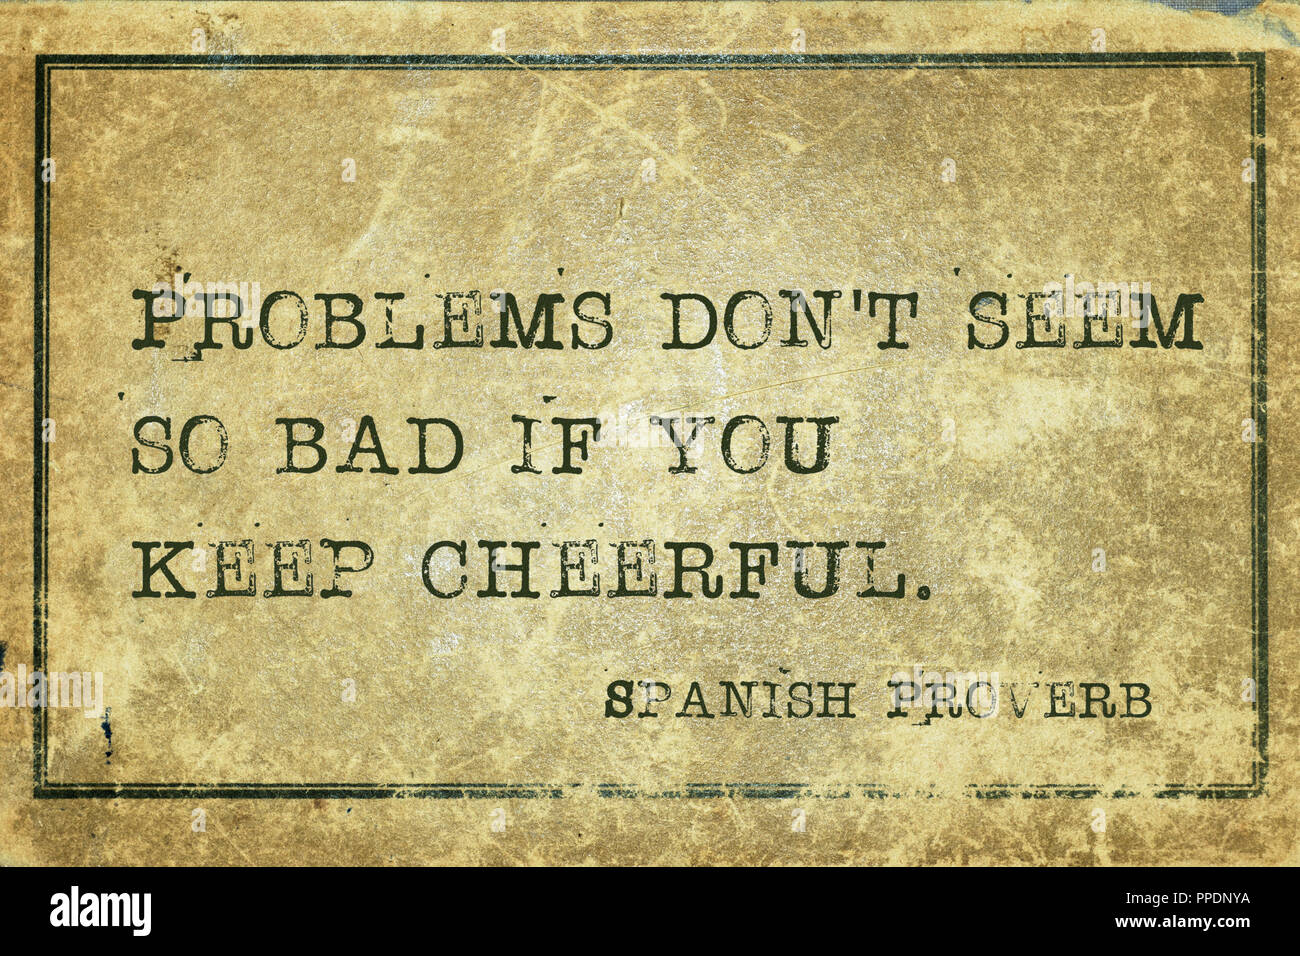 Problems don't seem so bad if you keep cheerful - ancient Spanish proverb printed on grunge vintage cardboard Stock Photo